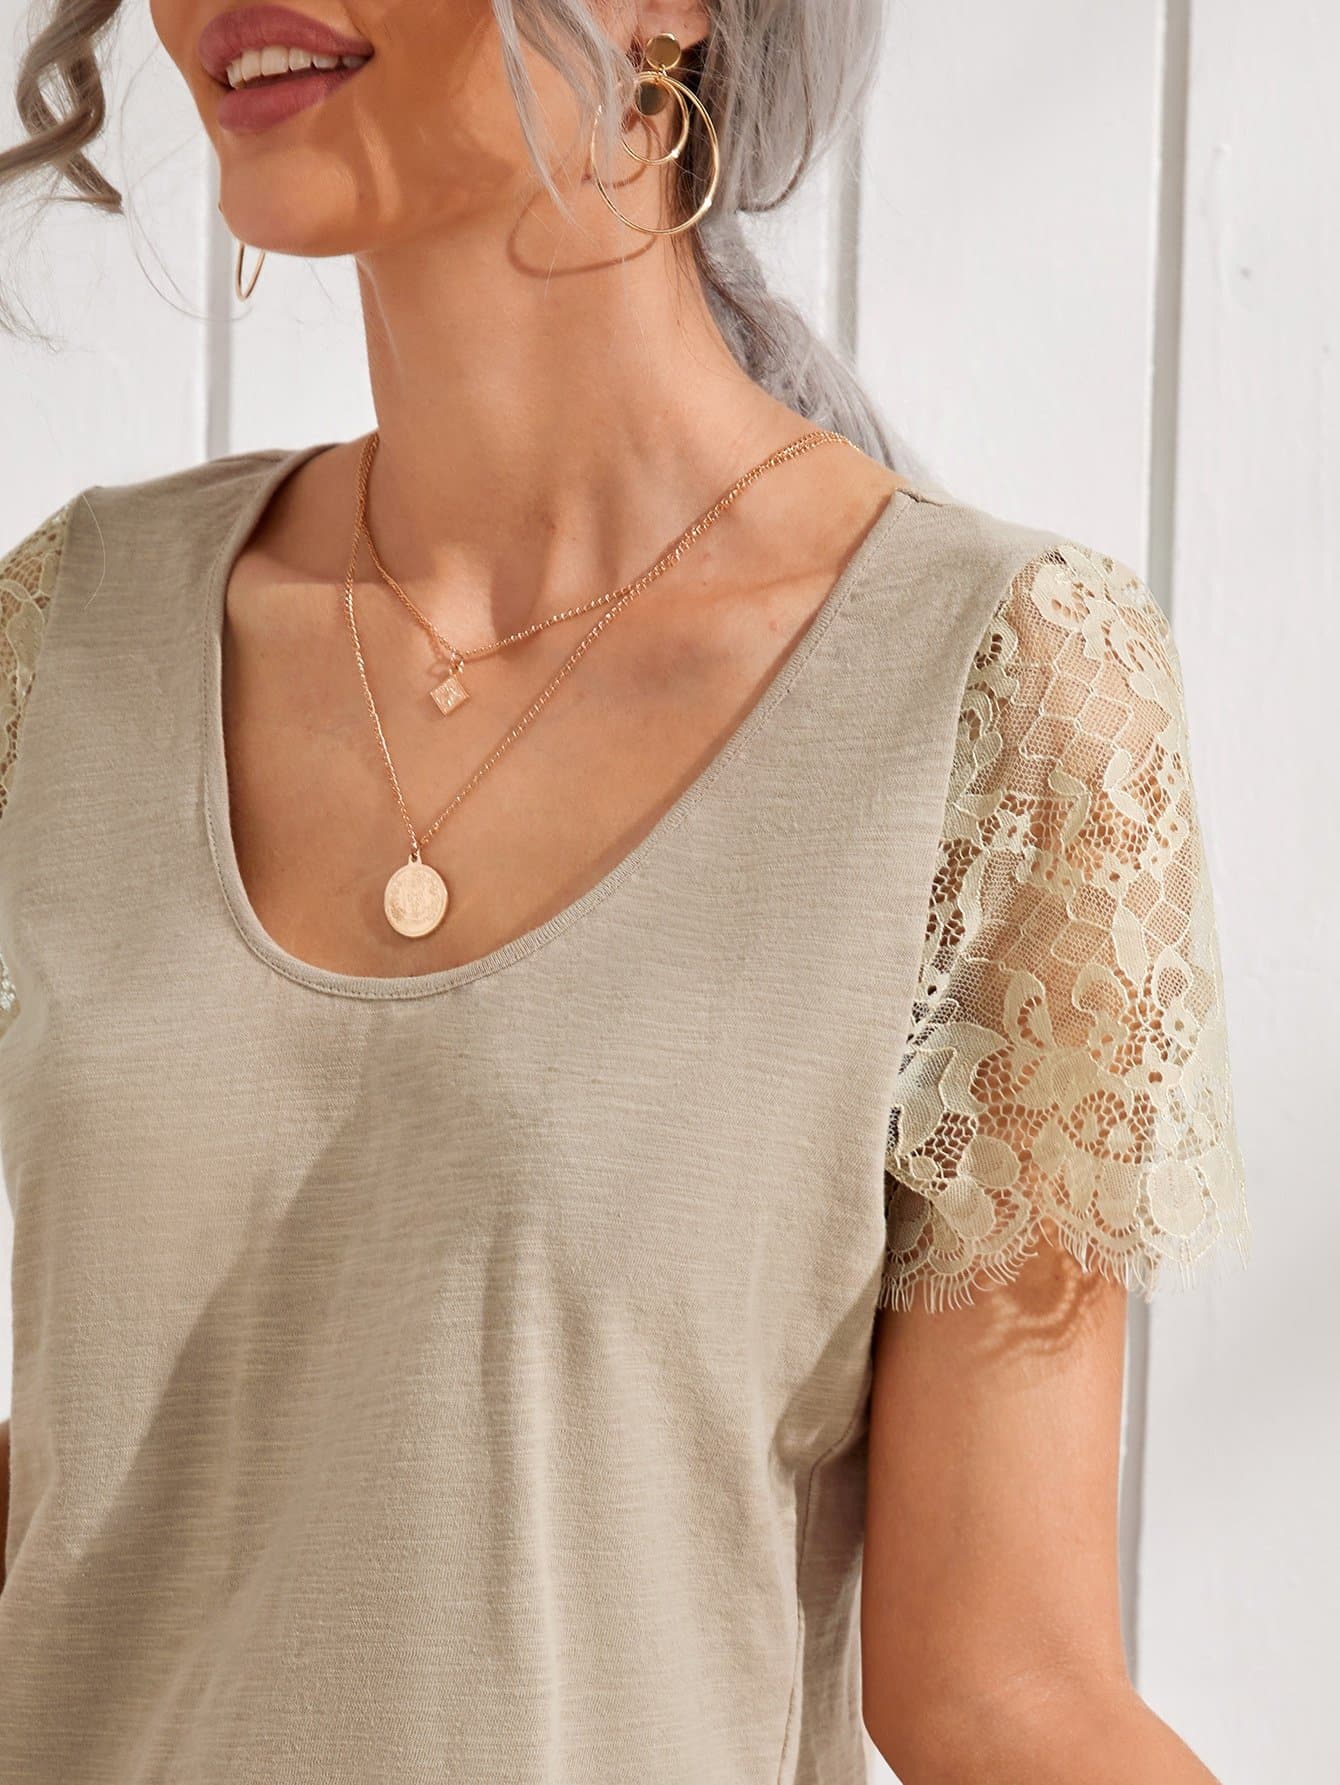 Scoop Neck Lace Sleeve Top